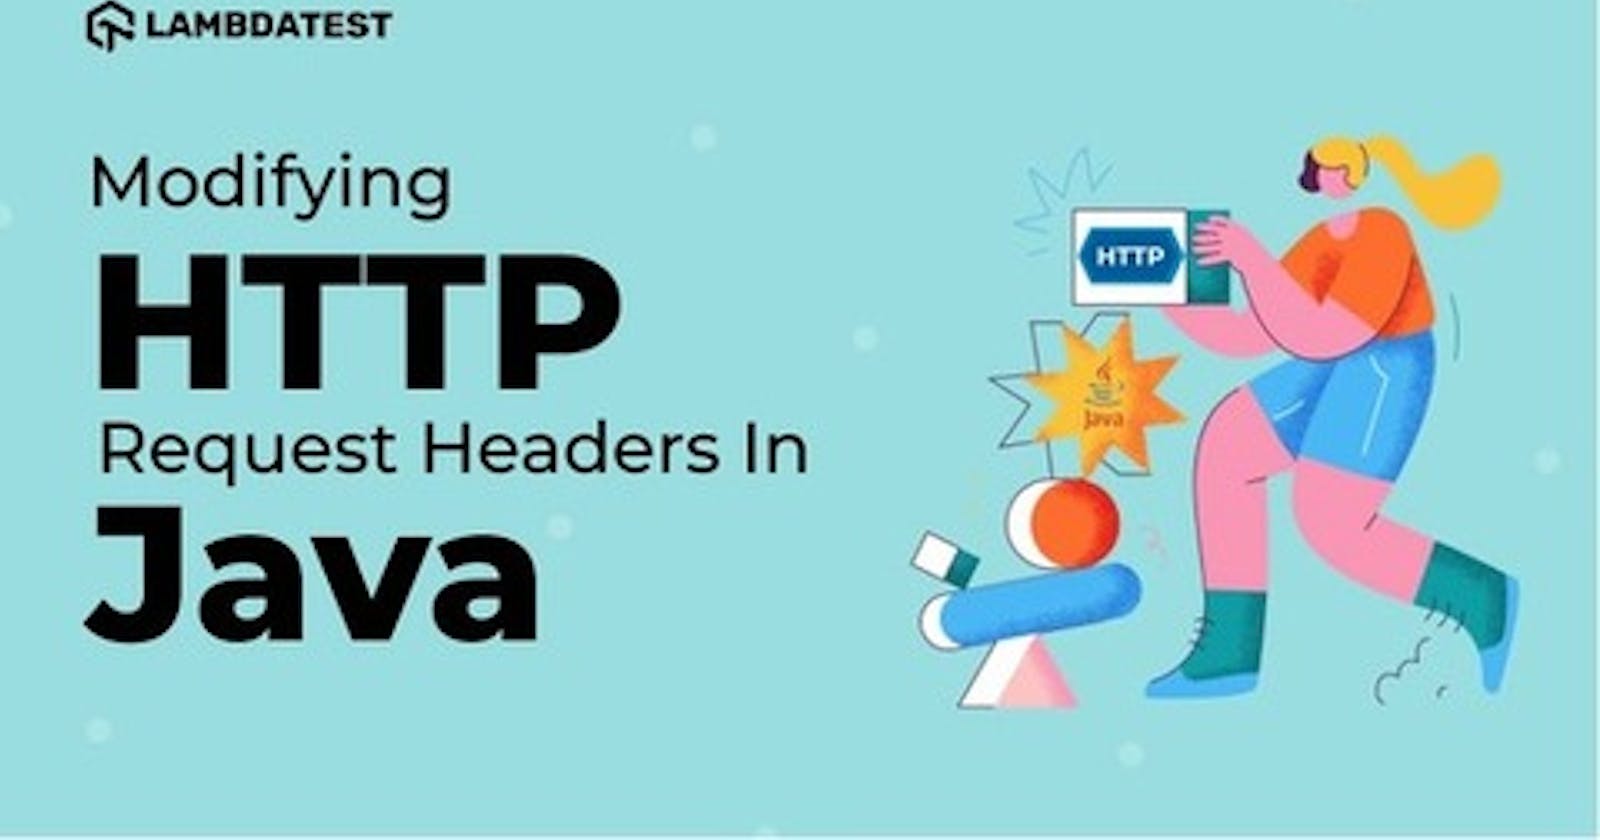 How To Modify HTTP Request Headers In JAVA Using Selenium WebDriver?